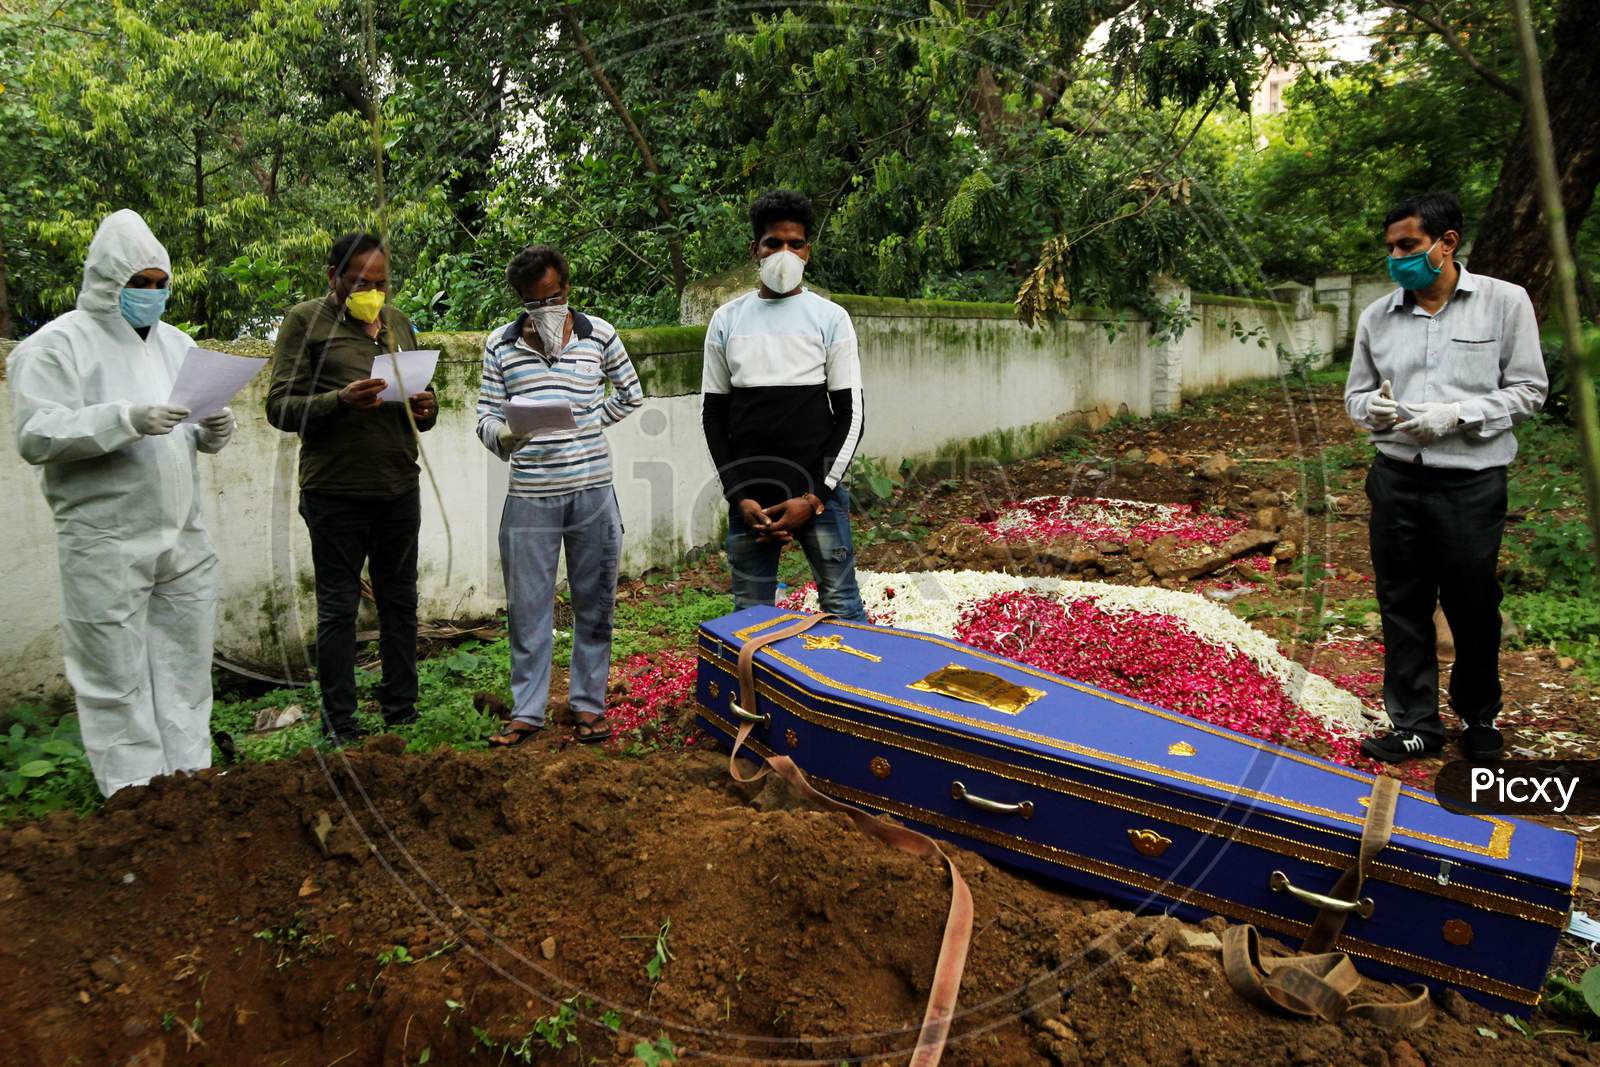 A priest wearing personal protective equipment (PPE) and the relatives pray over the coffin of a person who died from the coronavirus disease (COVID-19) during a funeral at a cemetery in Mumbai, India June 27, 2020.